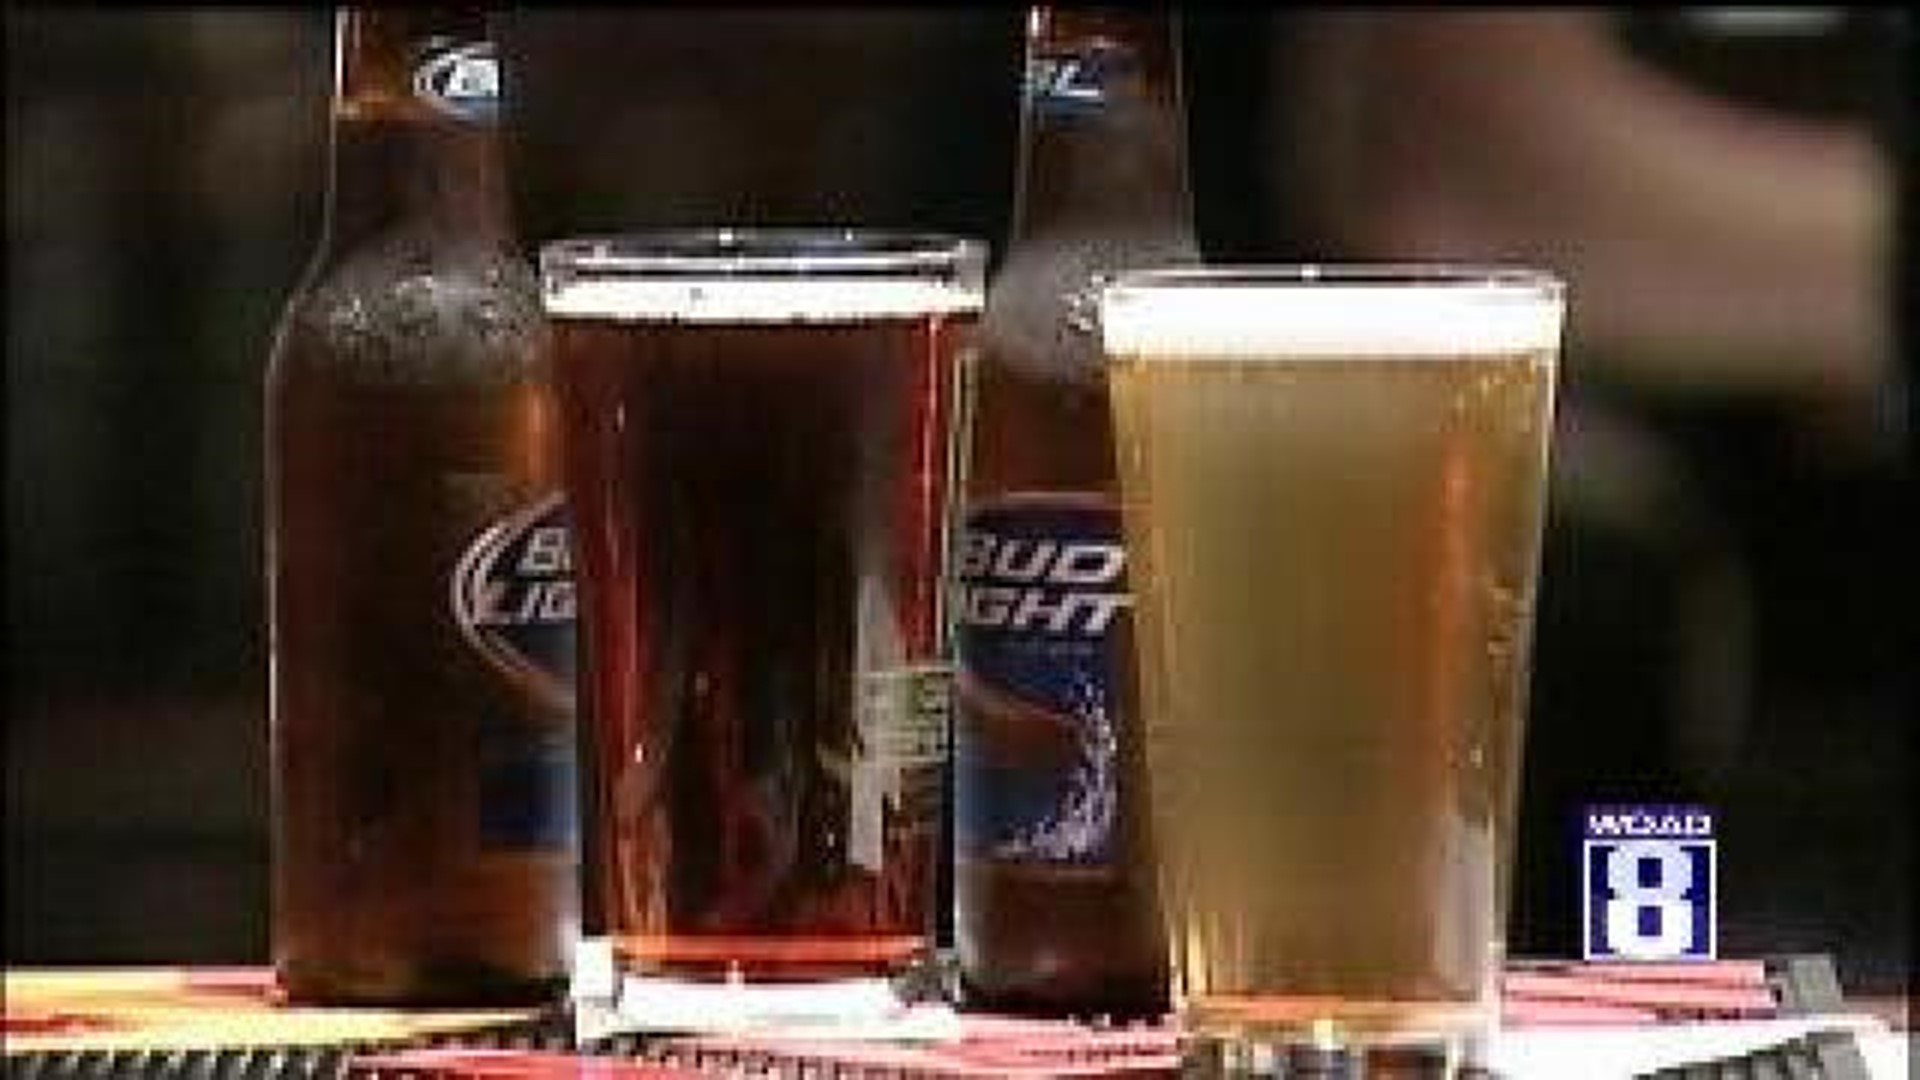 Anheuser-Busch accused of watering down beer